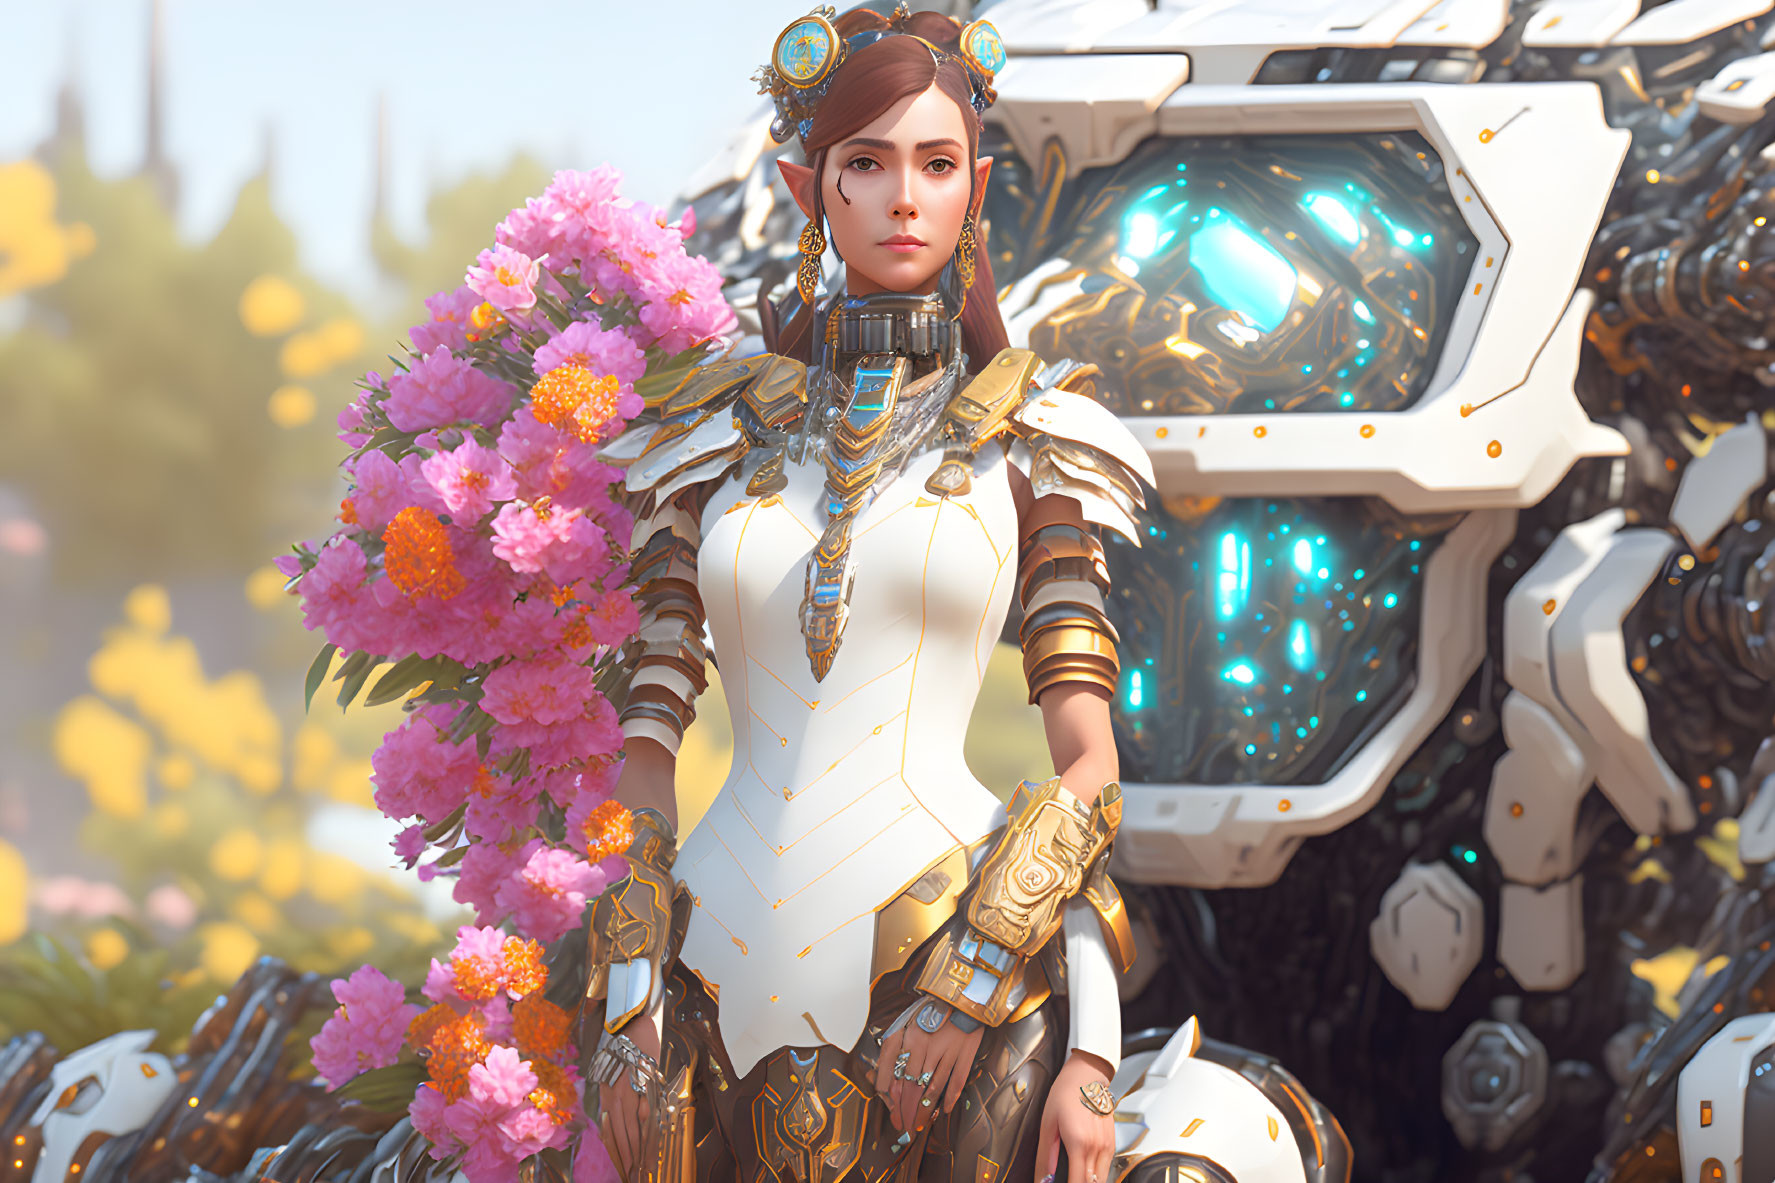 Futuristic armored woman with large robotic suit in spring landscape